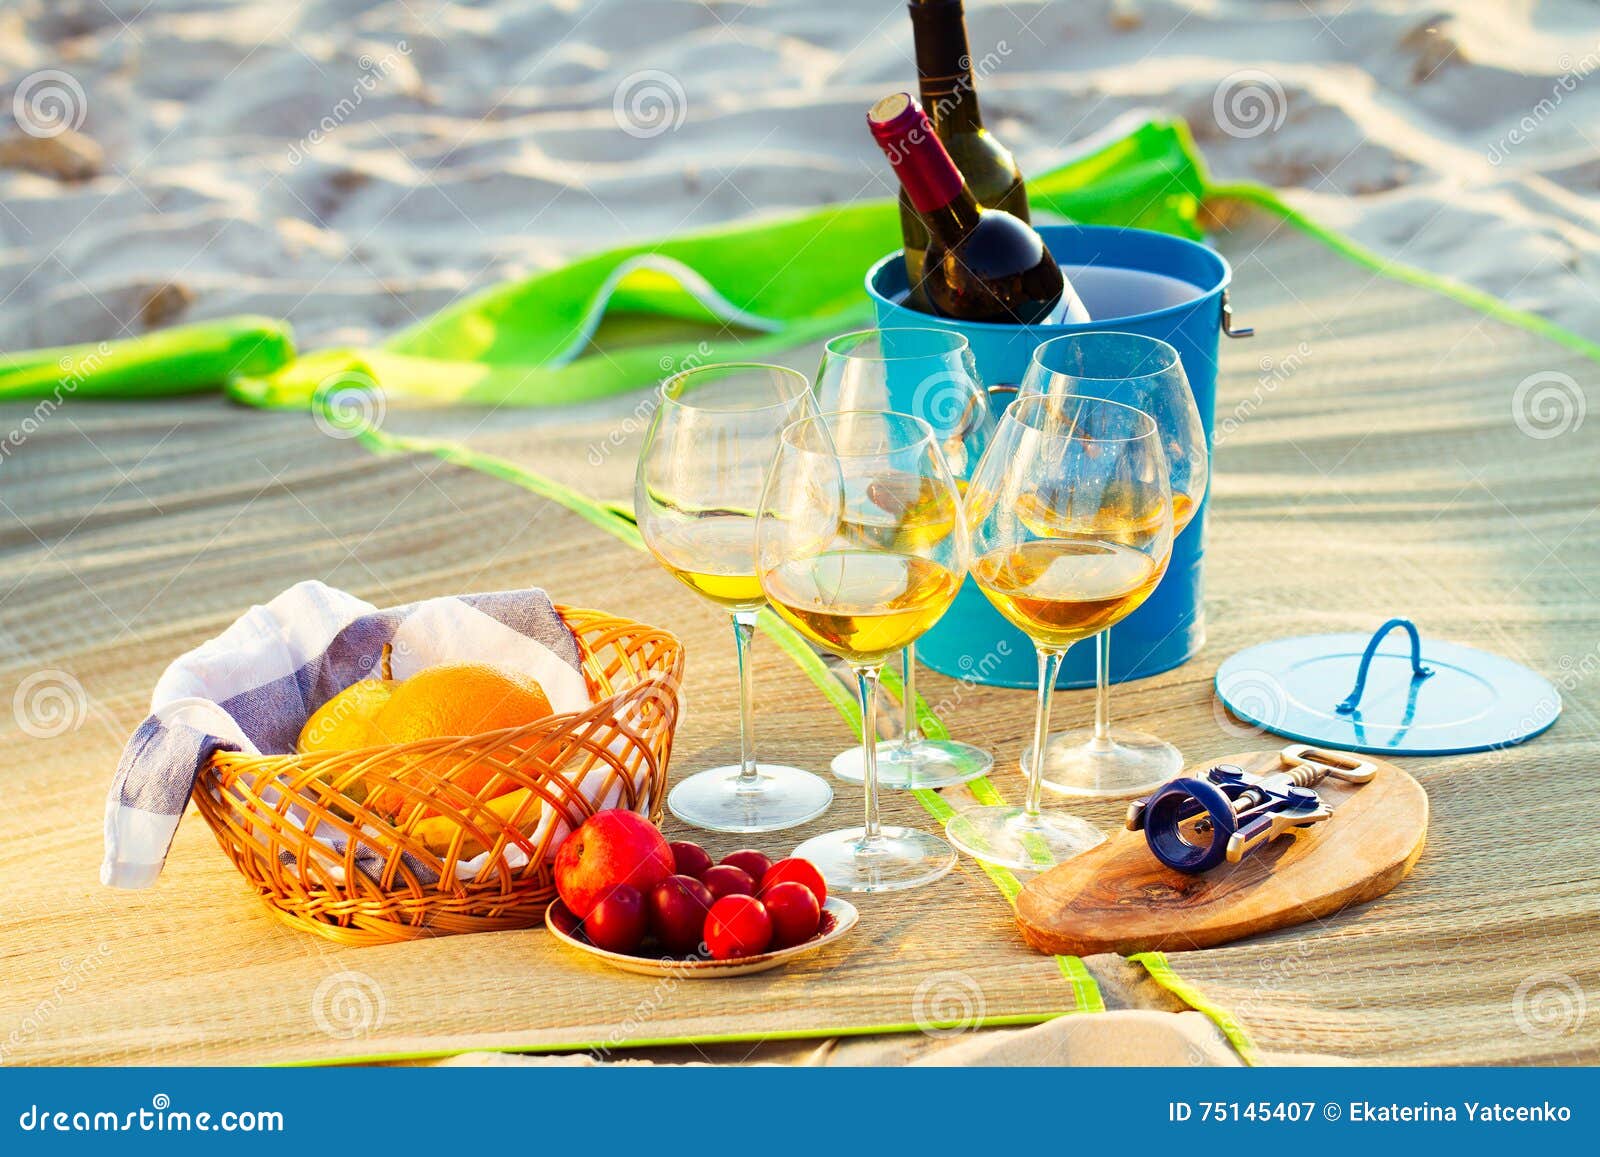 Glasses of the White Wine on the Beach on Sunset, Picnic Theme, Stock ...